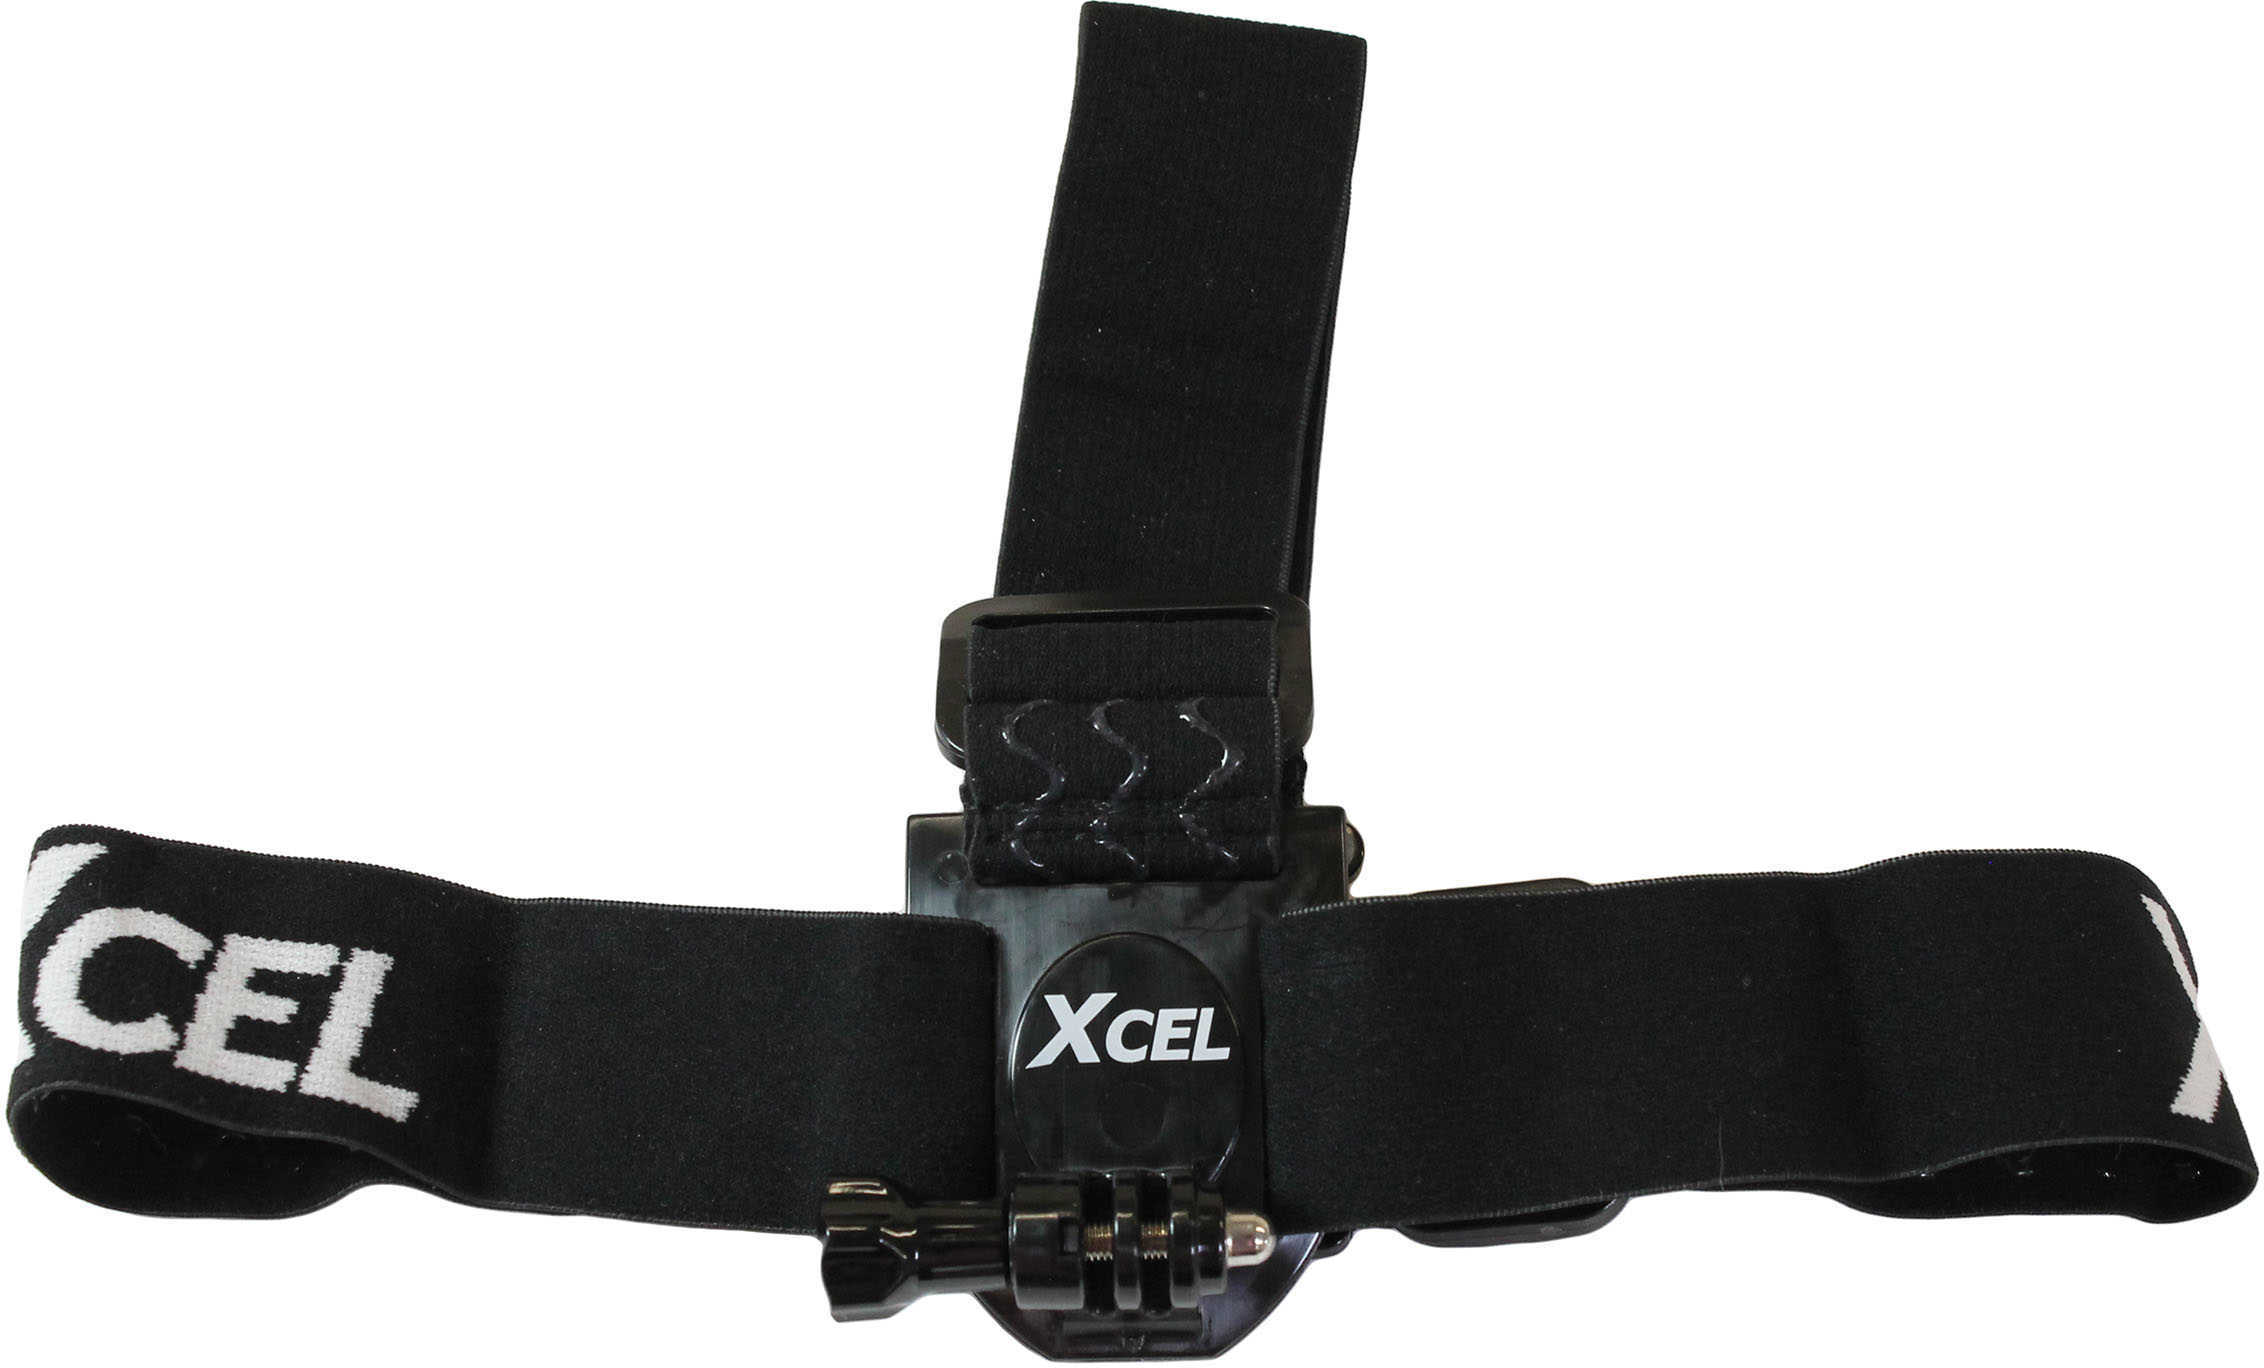 Spy Point Fully Adjustable Strap For Xcel HD Cameras